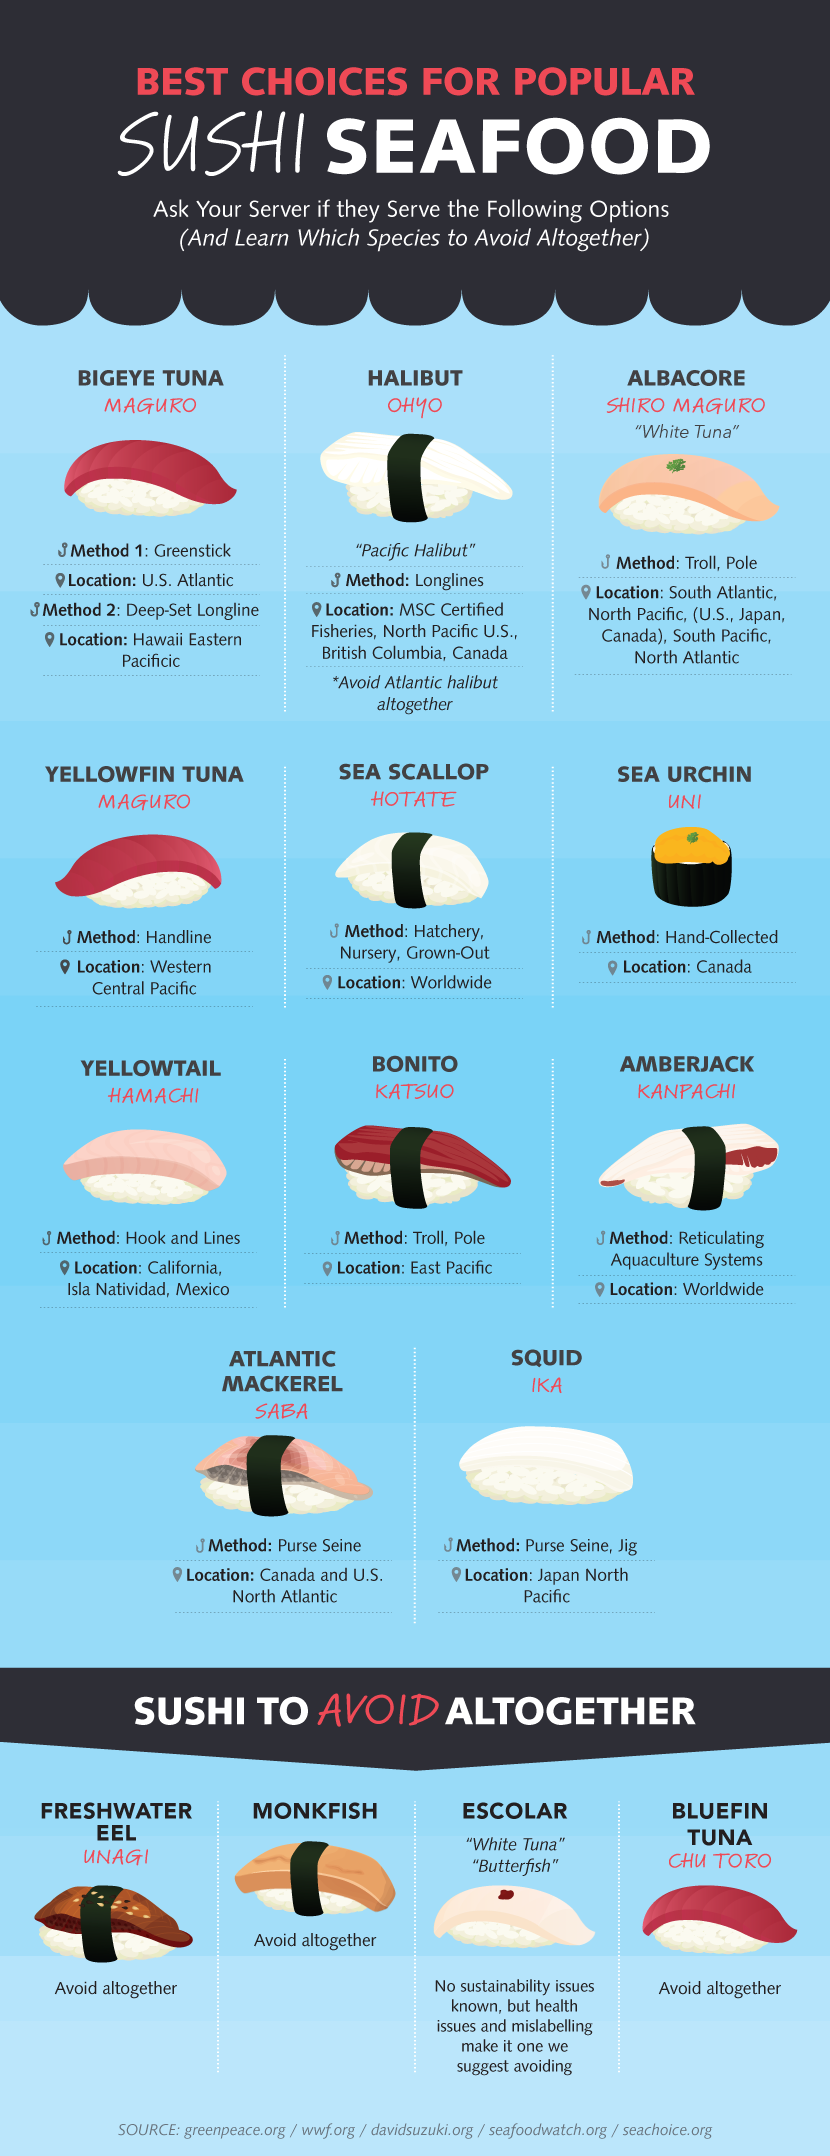 Best Choices For Popular Sushi and Seafood - Sustainable Sushi